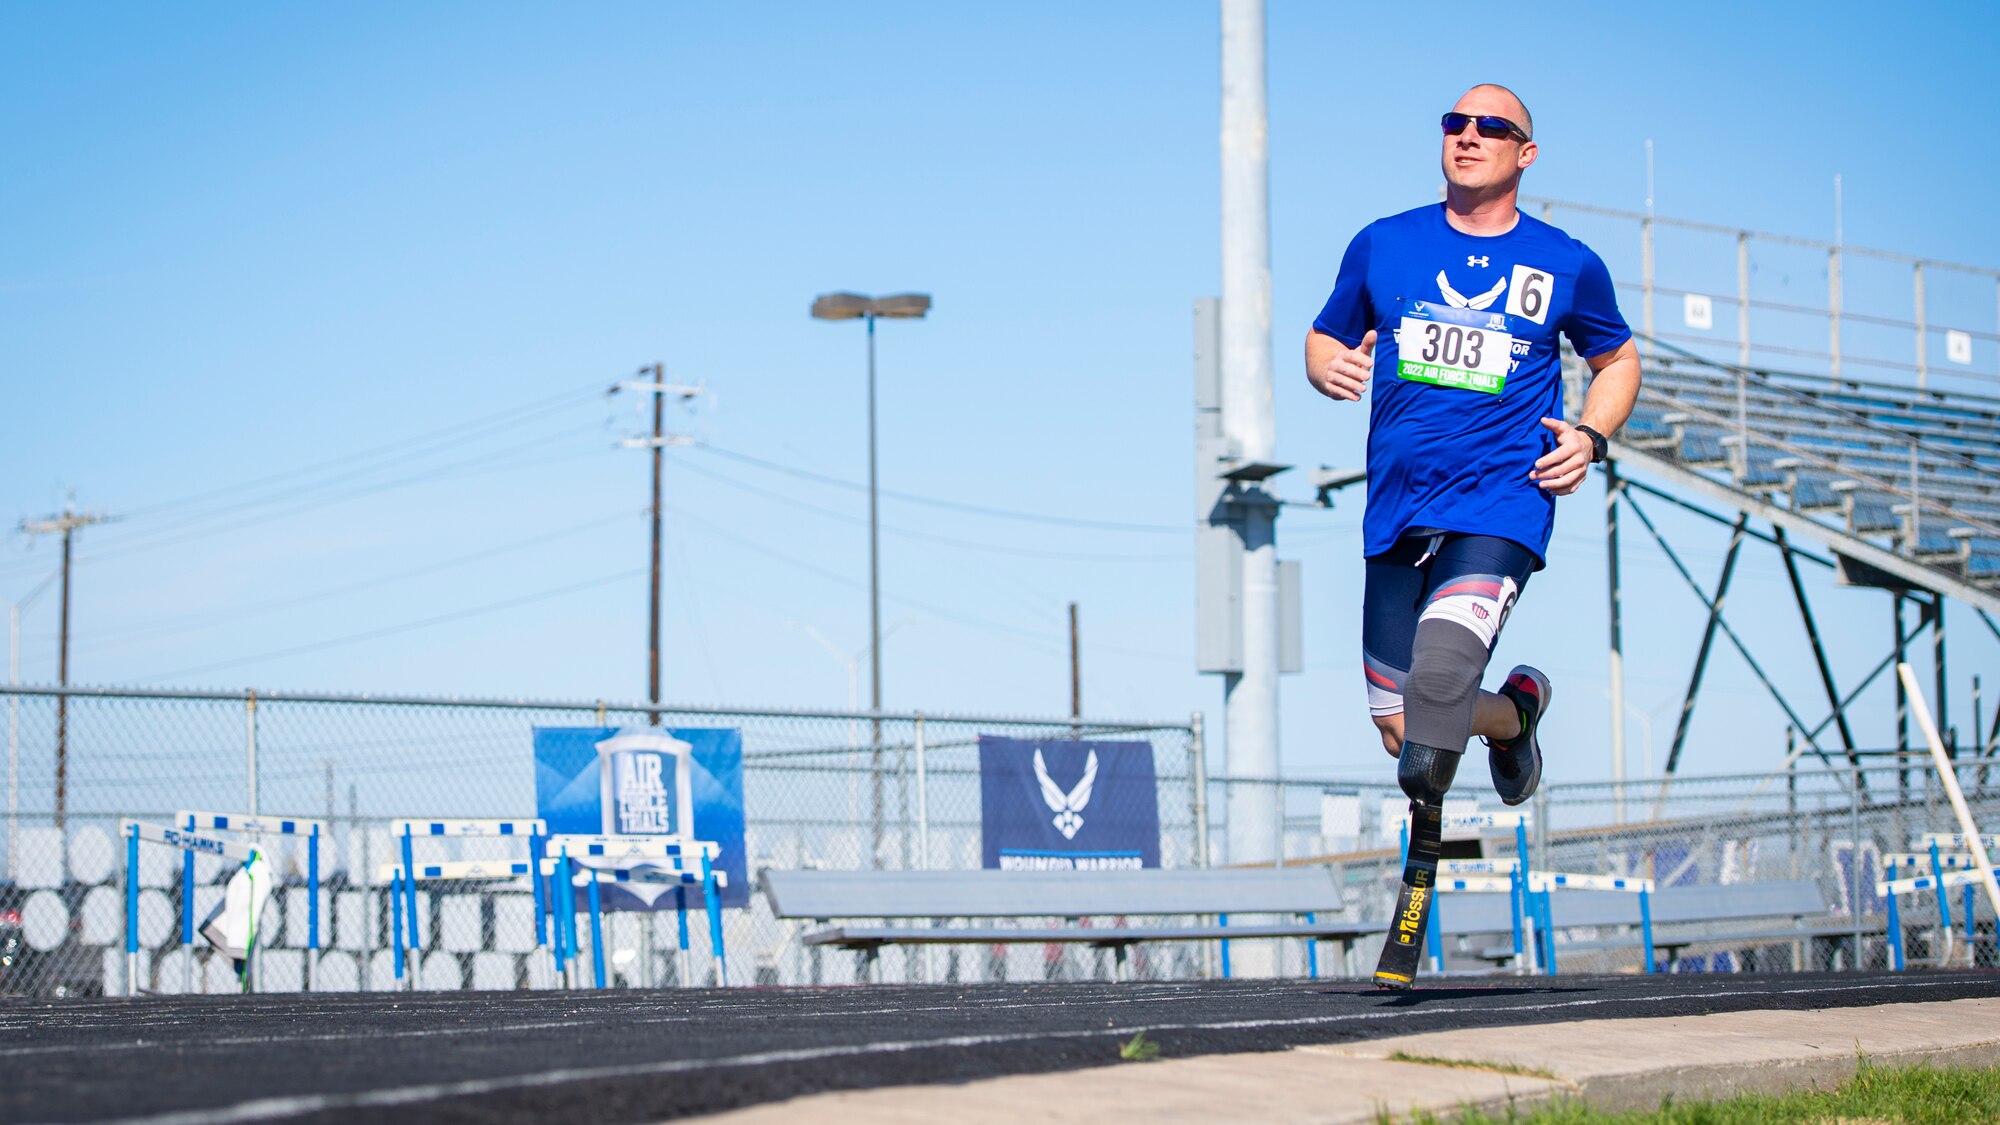 U.S. Air Force Senior Master Sgt. Benjamin Seekell, an Air Force Wounded Warrior athlete, runs a race during a track and field competition at Joint Base San Antonio-Randolph on March 23, 2022.